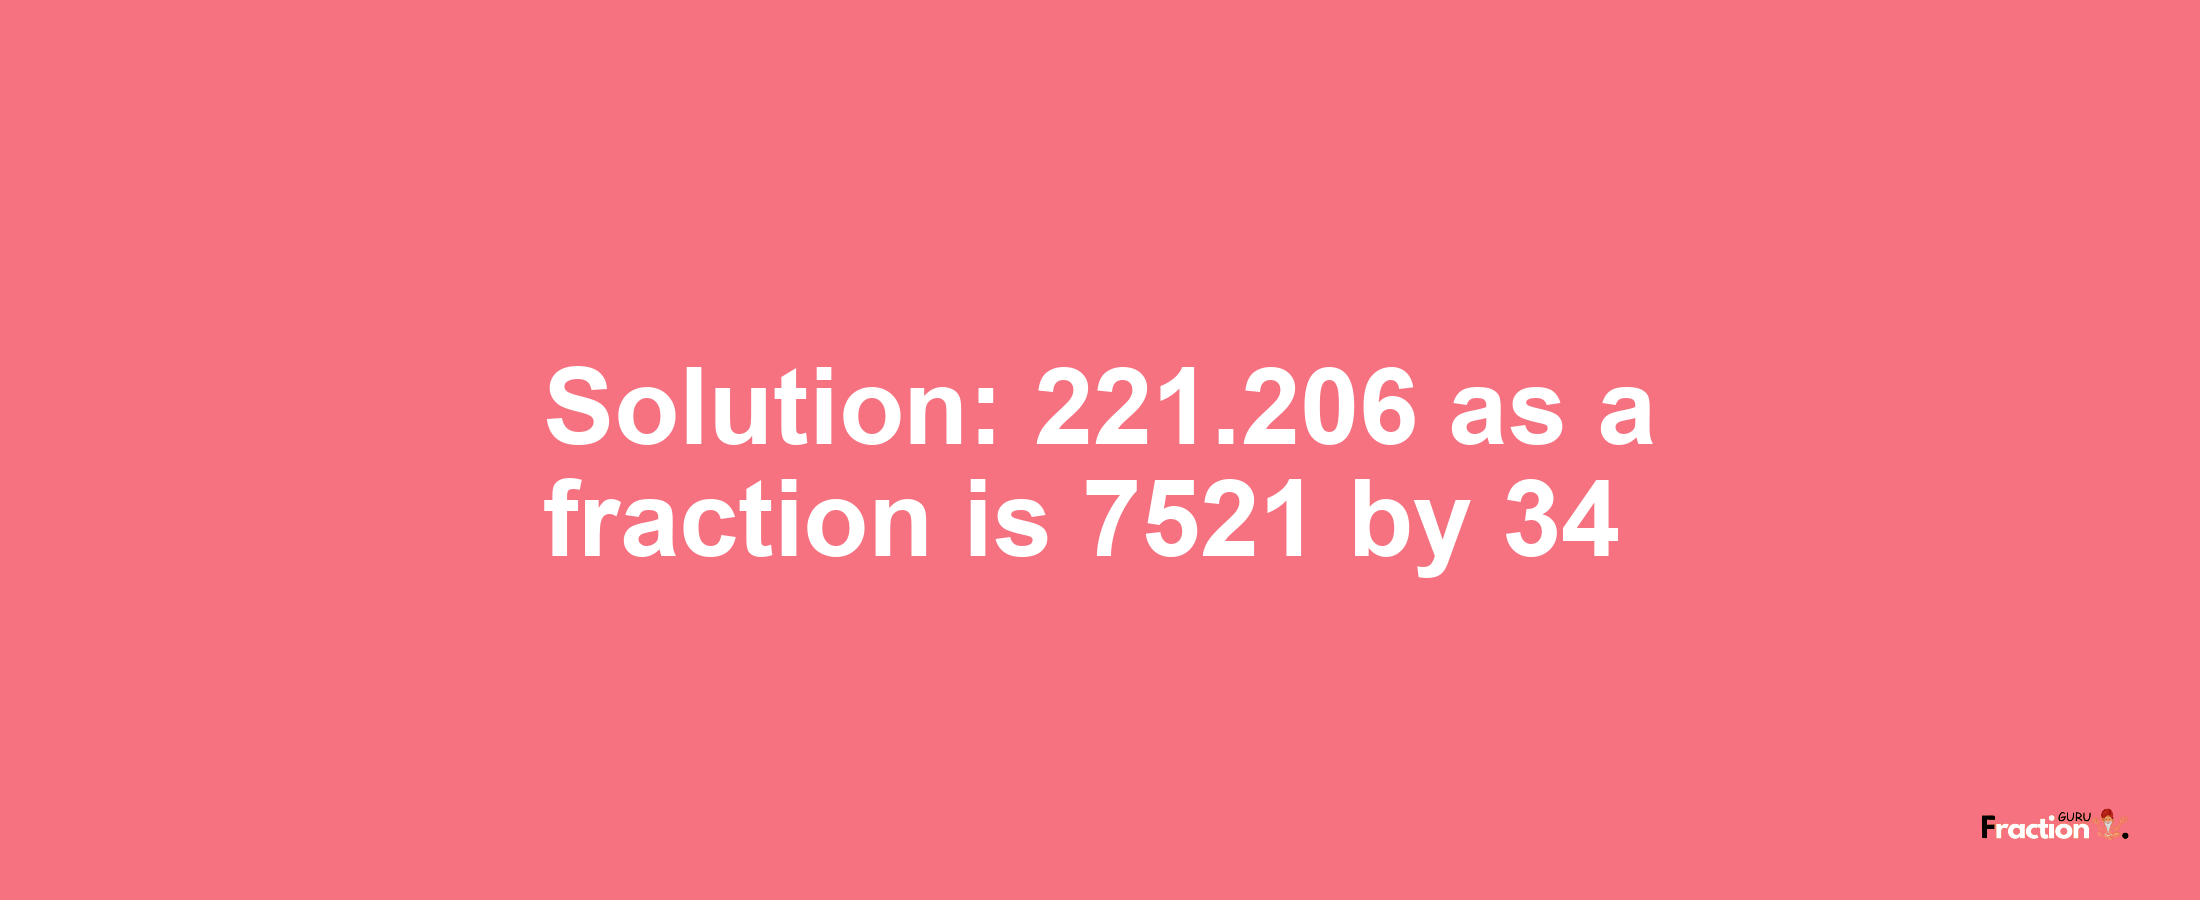 Solution:221.206 as a fraction is 7521/34